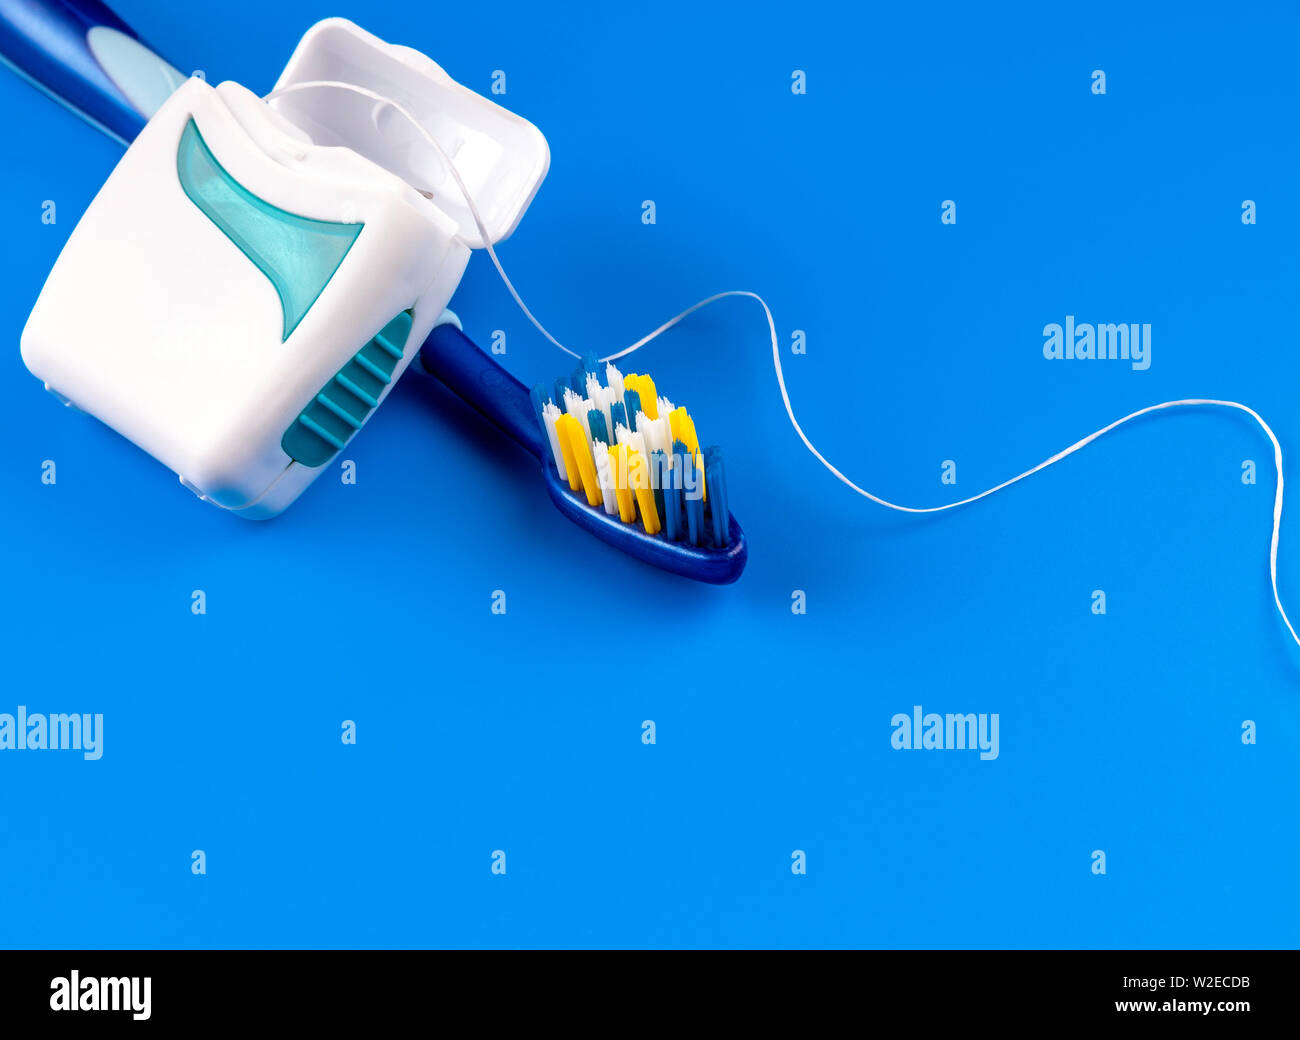 Toothbrush and floss on blue background.Dentist or dental care concept.- Image Stock Photo